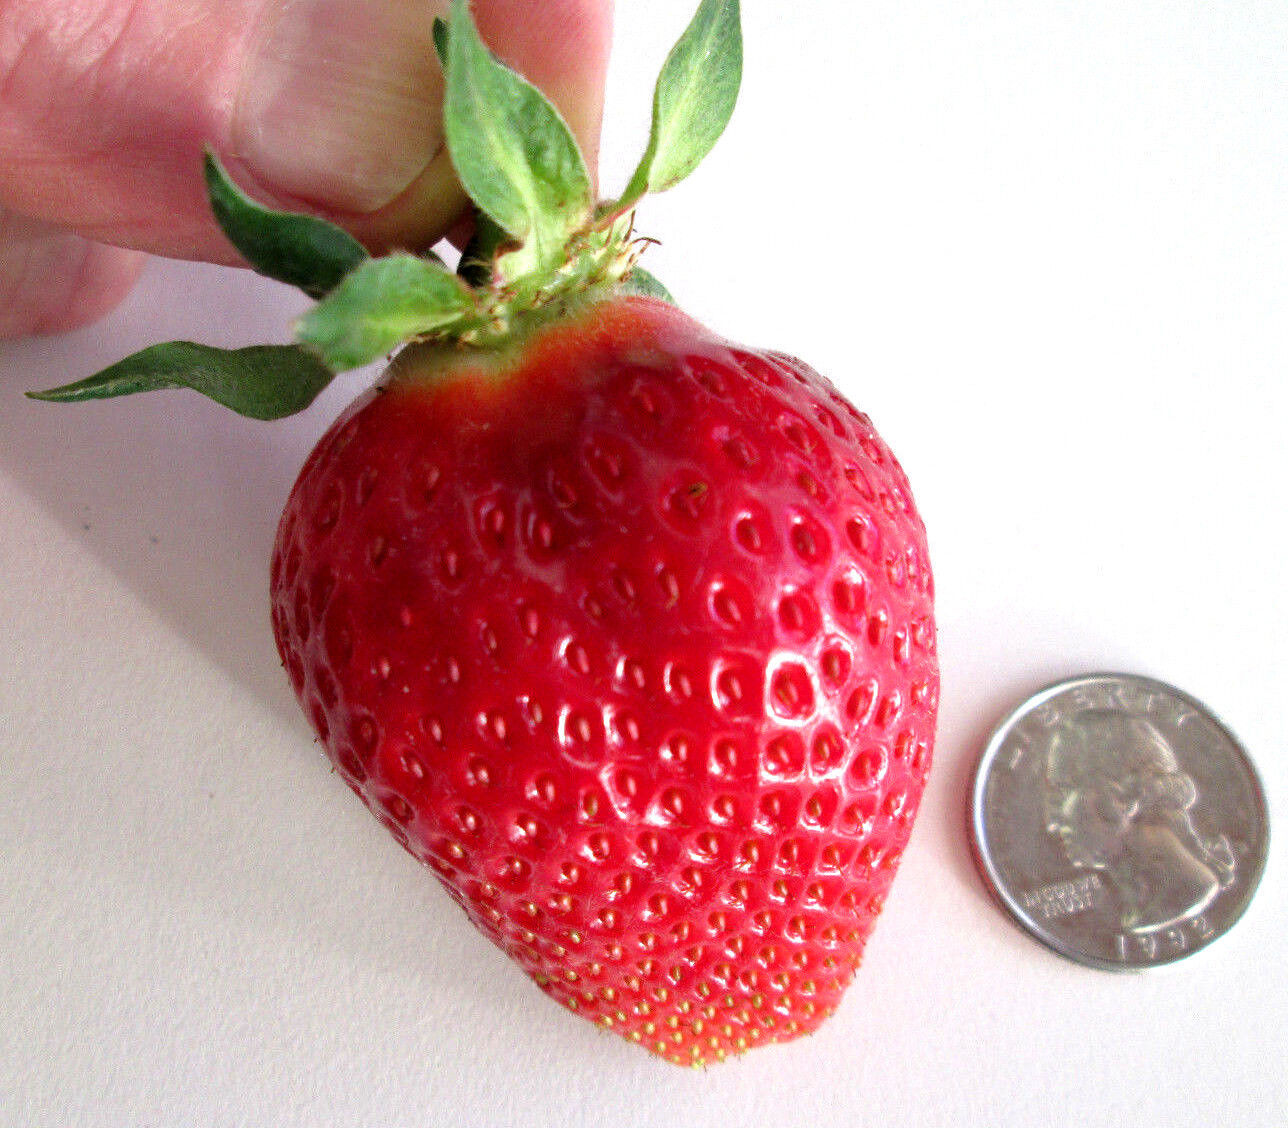 Primary image for 10 PUGET CRIMSON STRAWBERRY PLANTS BARE ROOT  Large Berry Best Flavor High Yield